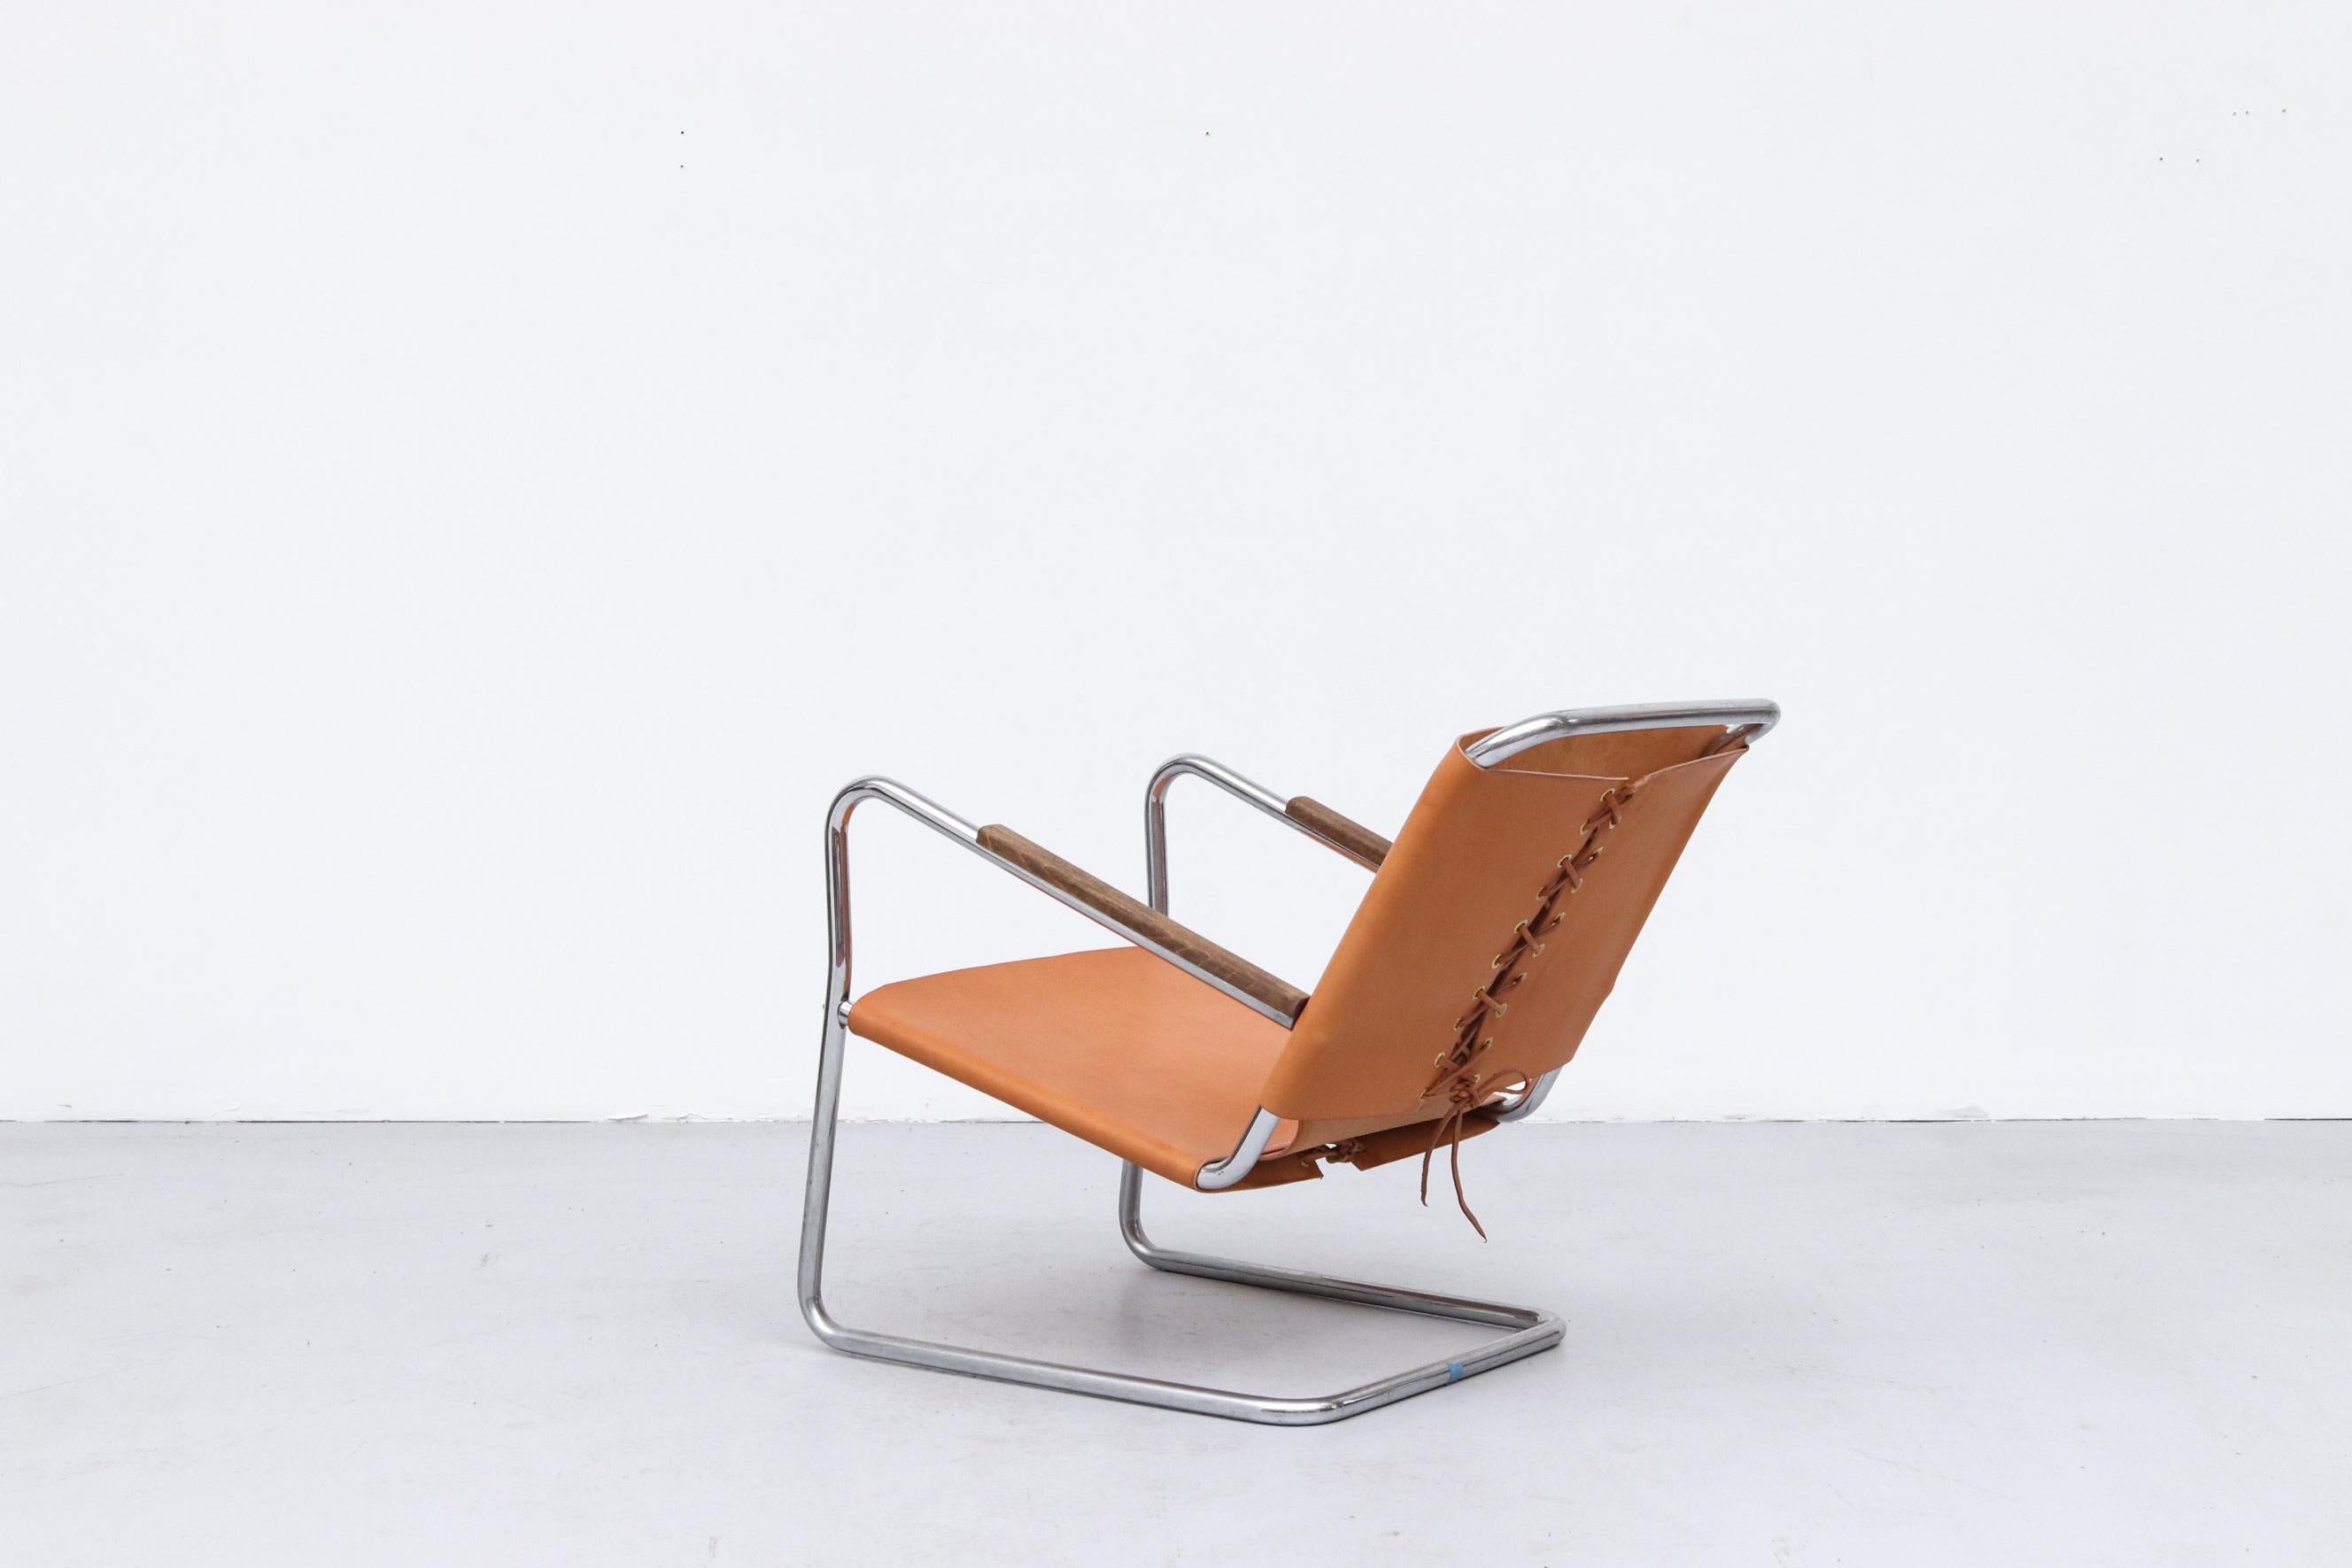 Mid-20th Century 1930s Bas Van Pelt Leather and Chrome Tubular Lounge Chair with Wood Armrests For Sale